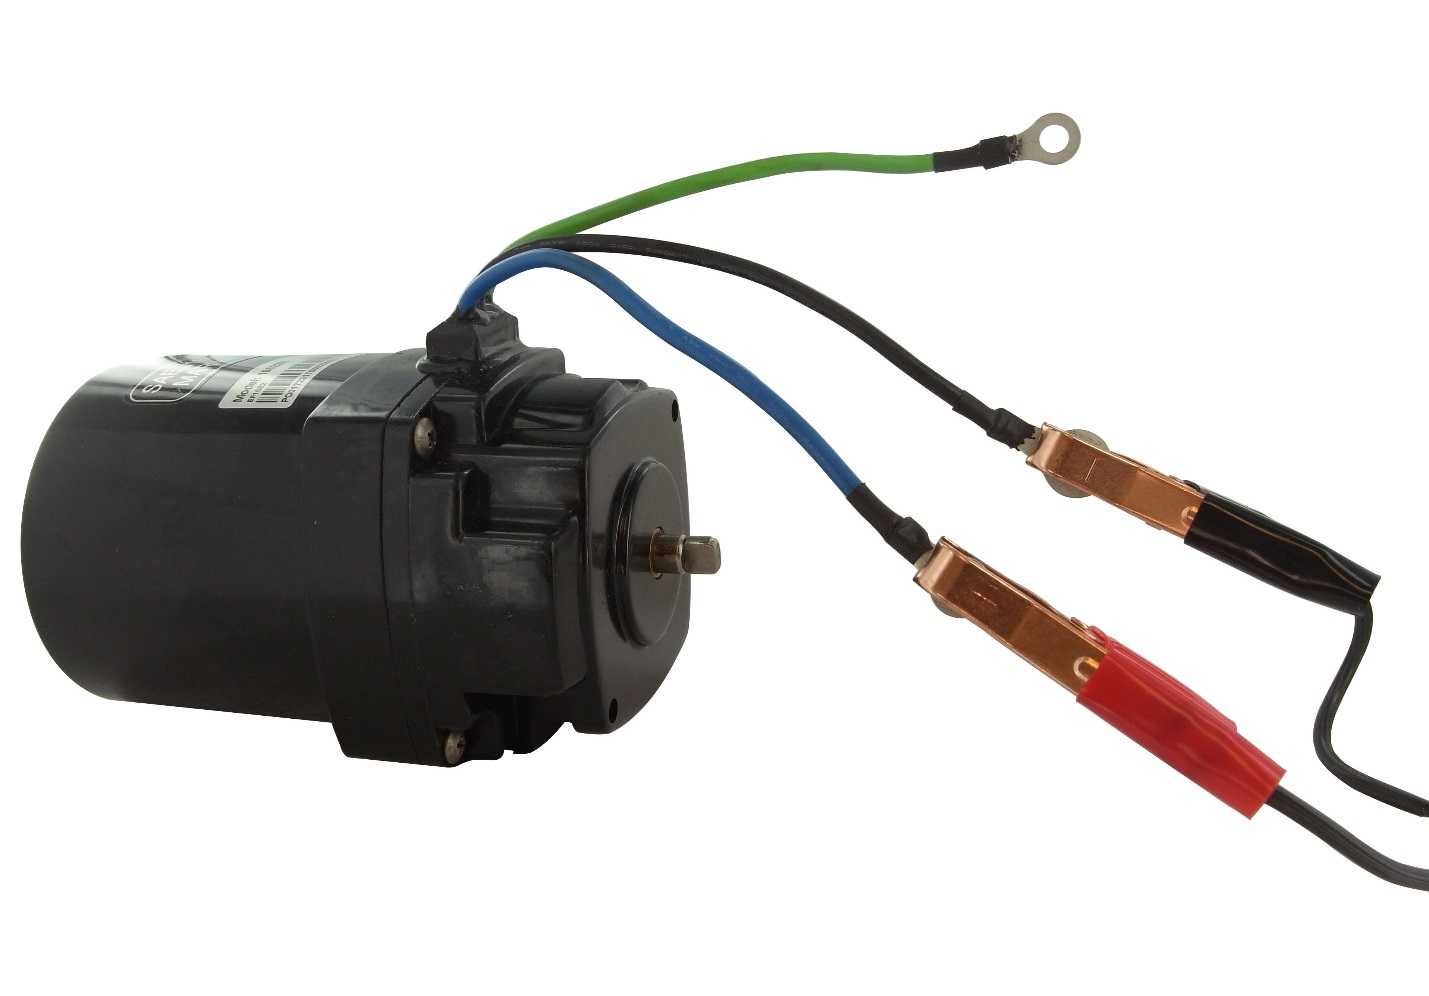 Now touch the positive (RED) battery cable to the blue wire on the motor. As soon as you touch the blue wire, the motor should start to spin counterclockwise. If the motor fails to spin, then it is most likely defective and will need to be replaced.